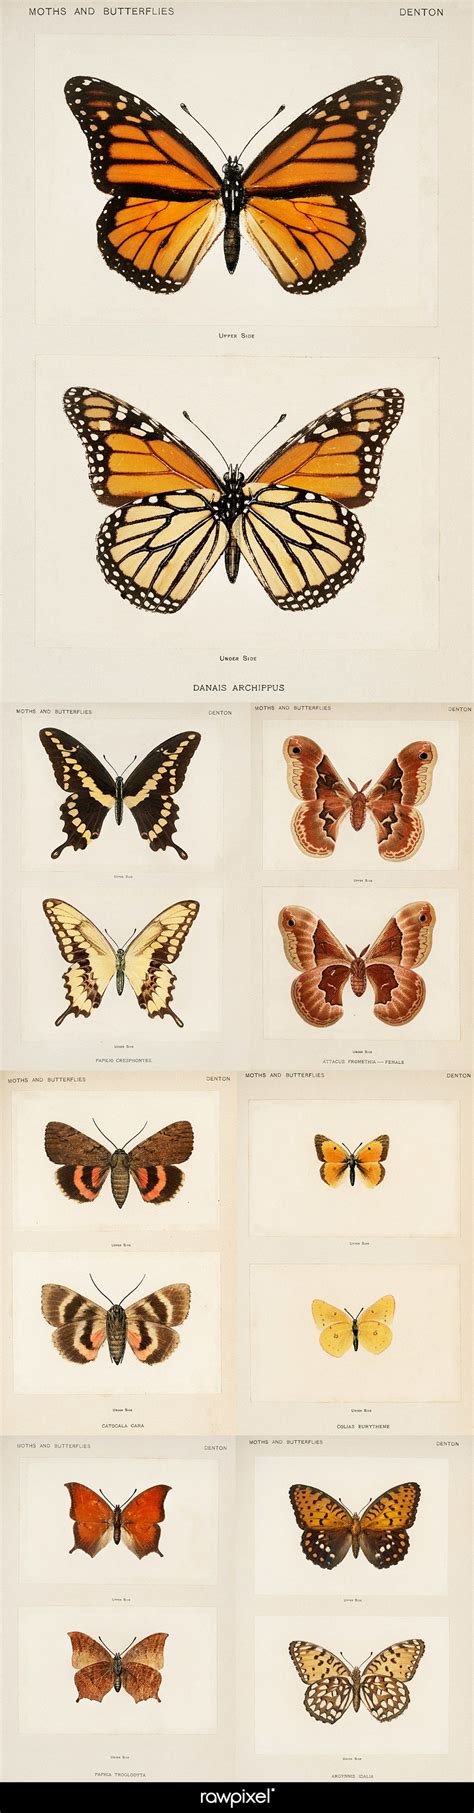 Download Free Cc0 Public Domain Butterfly And Moth Illustrations From